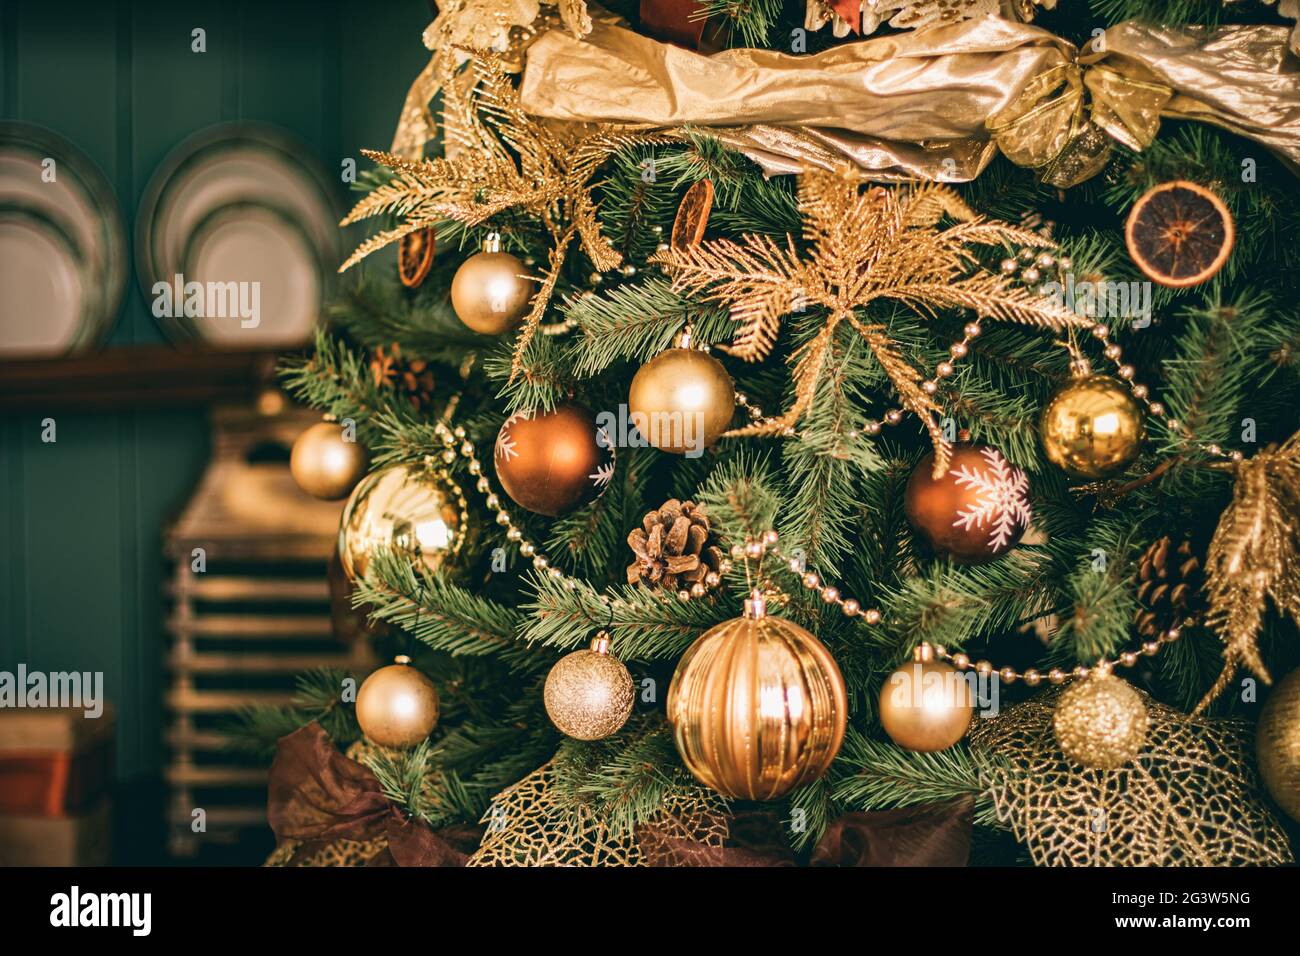 Golden Christmas tree look, decor in country style as holiday home ...